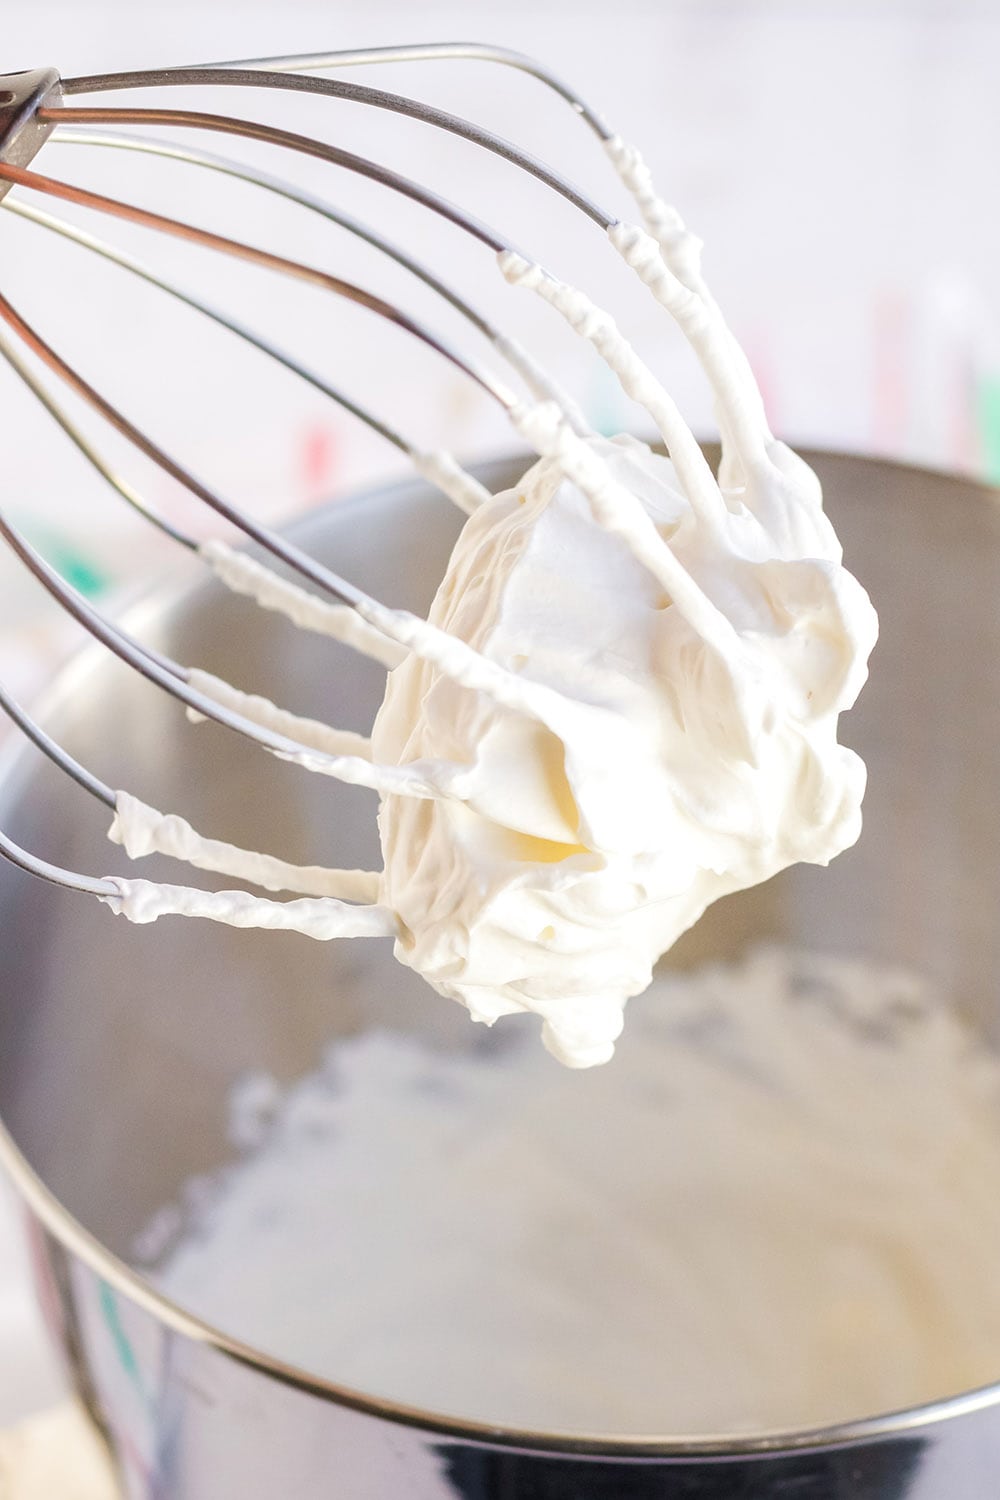 Whisk attachment with whipped cream on it.